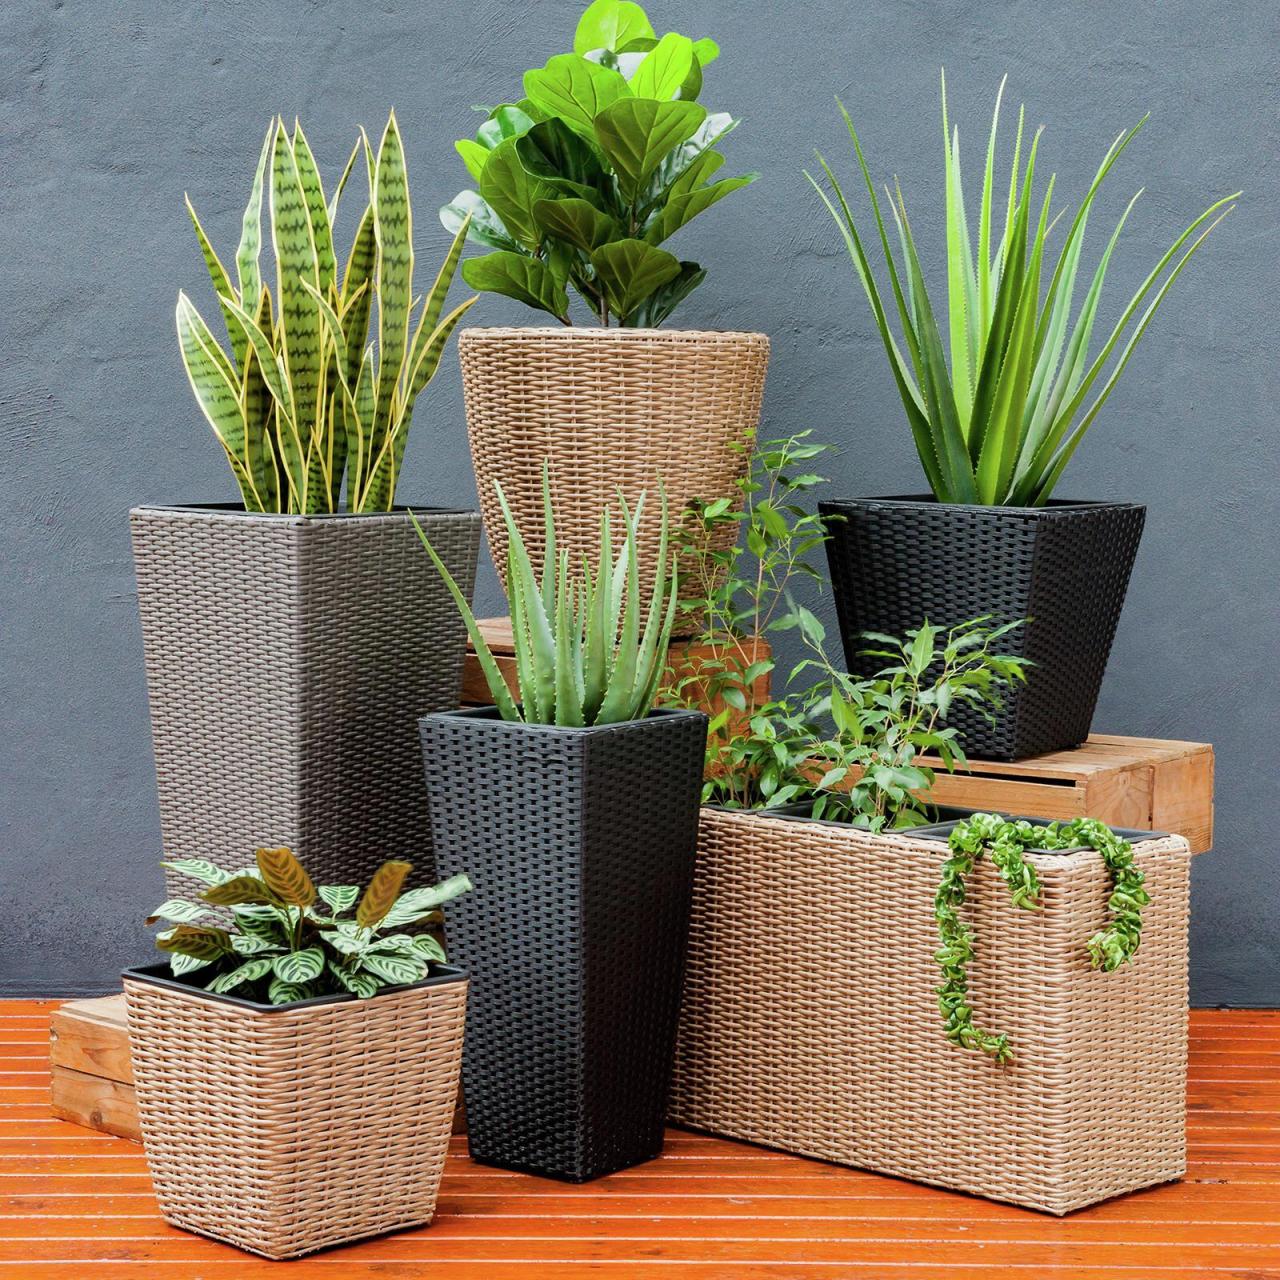 Hanging Plants Indoor | Bunnings Outdoor Hanging Plants: A Guide to Enhancing Your Outdoor Space